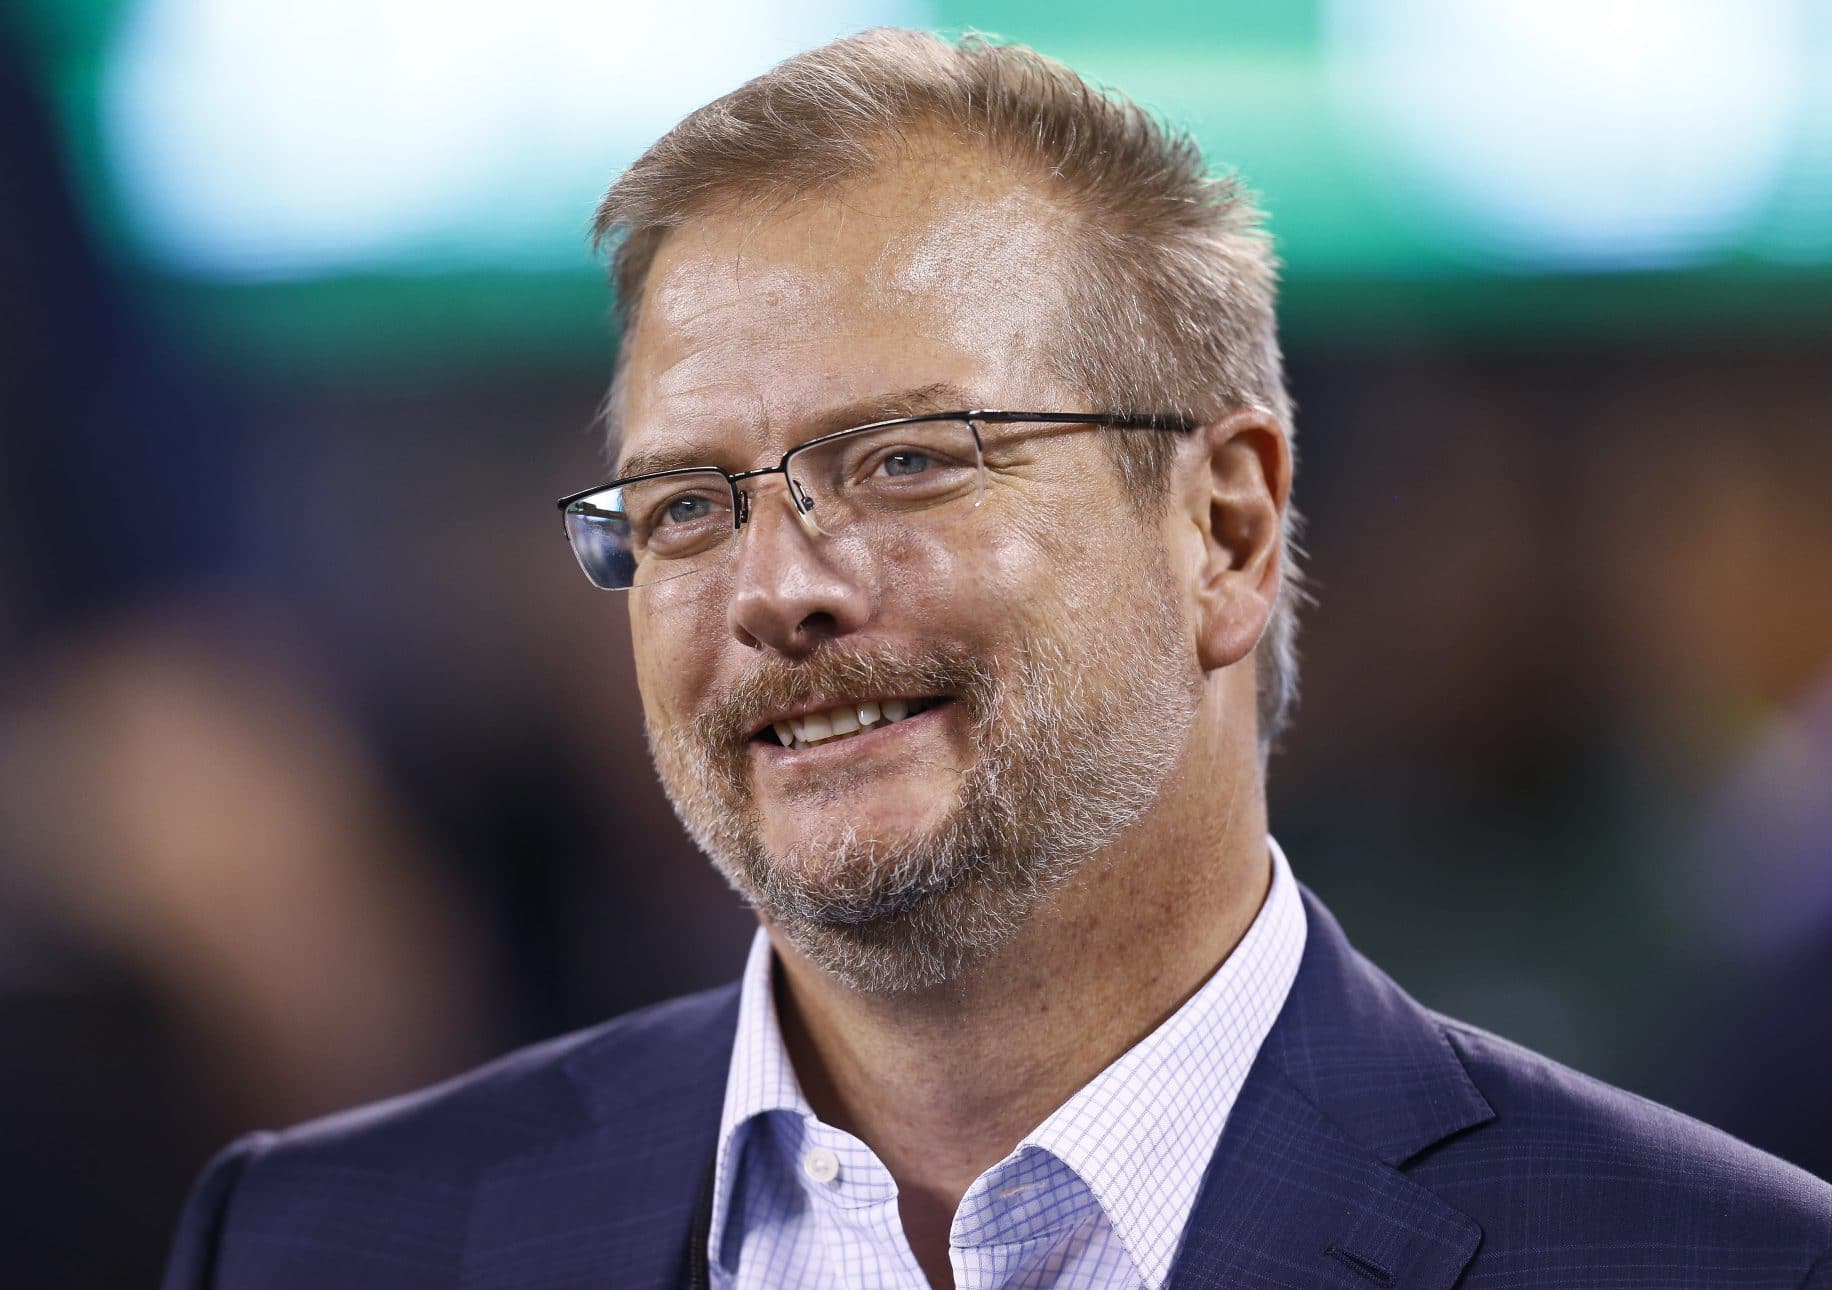 Mike Maccagnan, New York Jets Press Conference